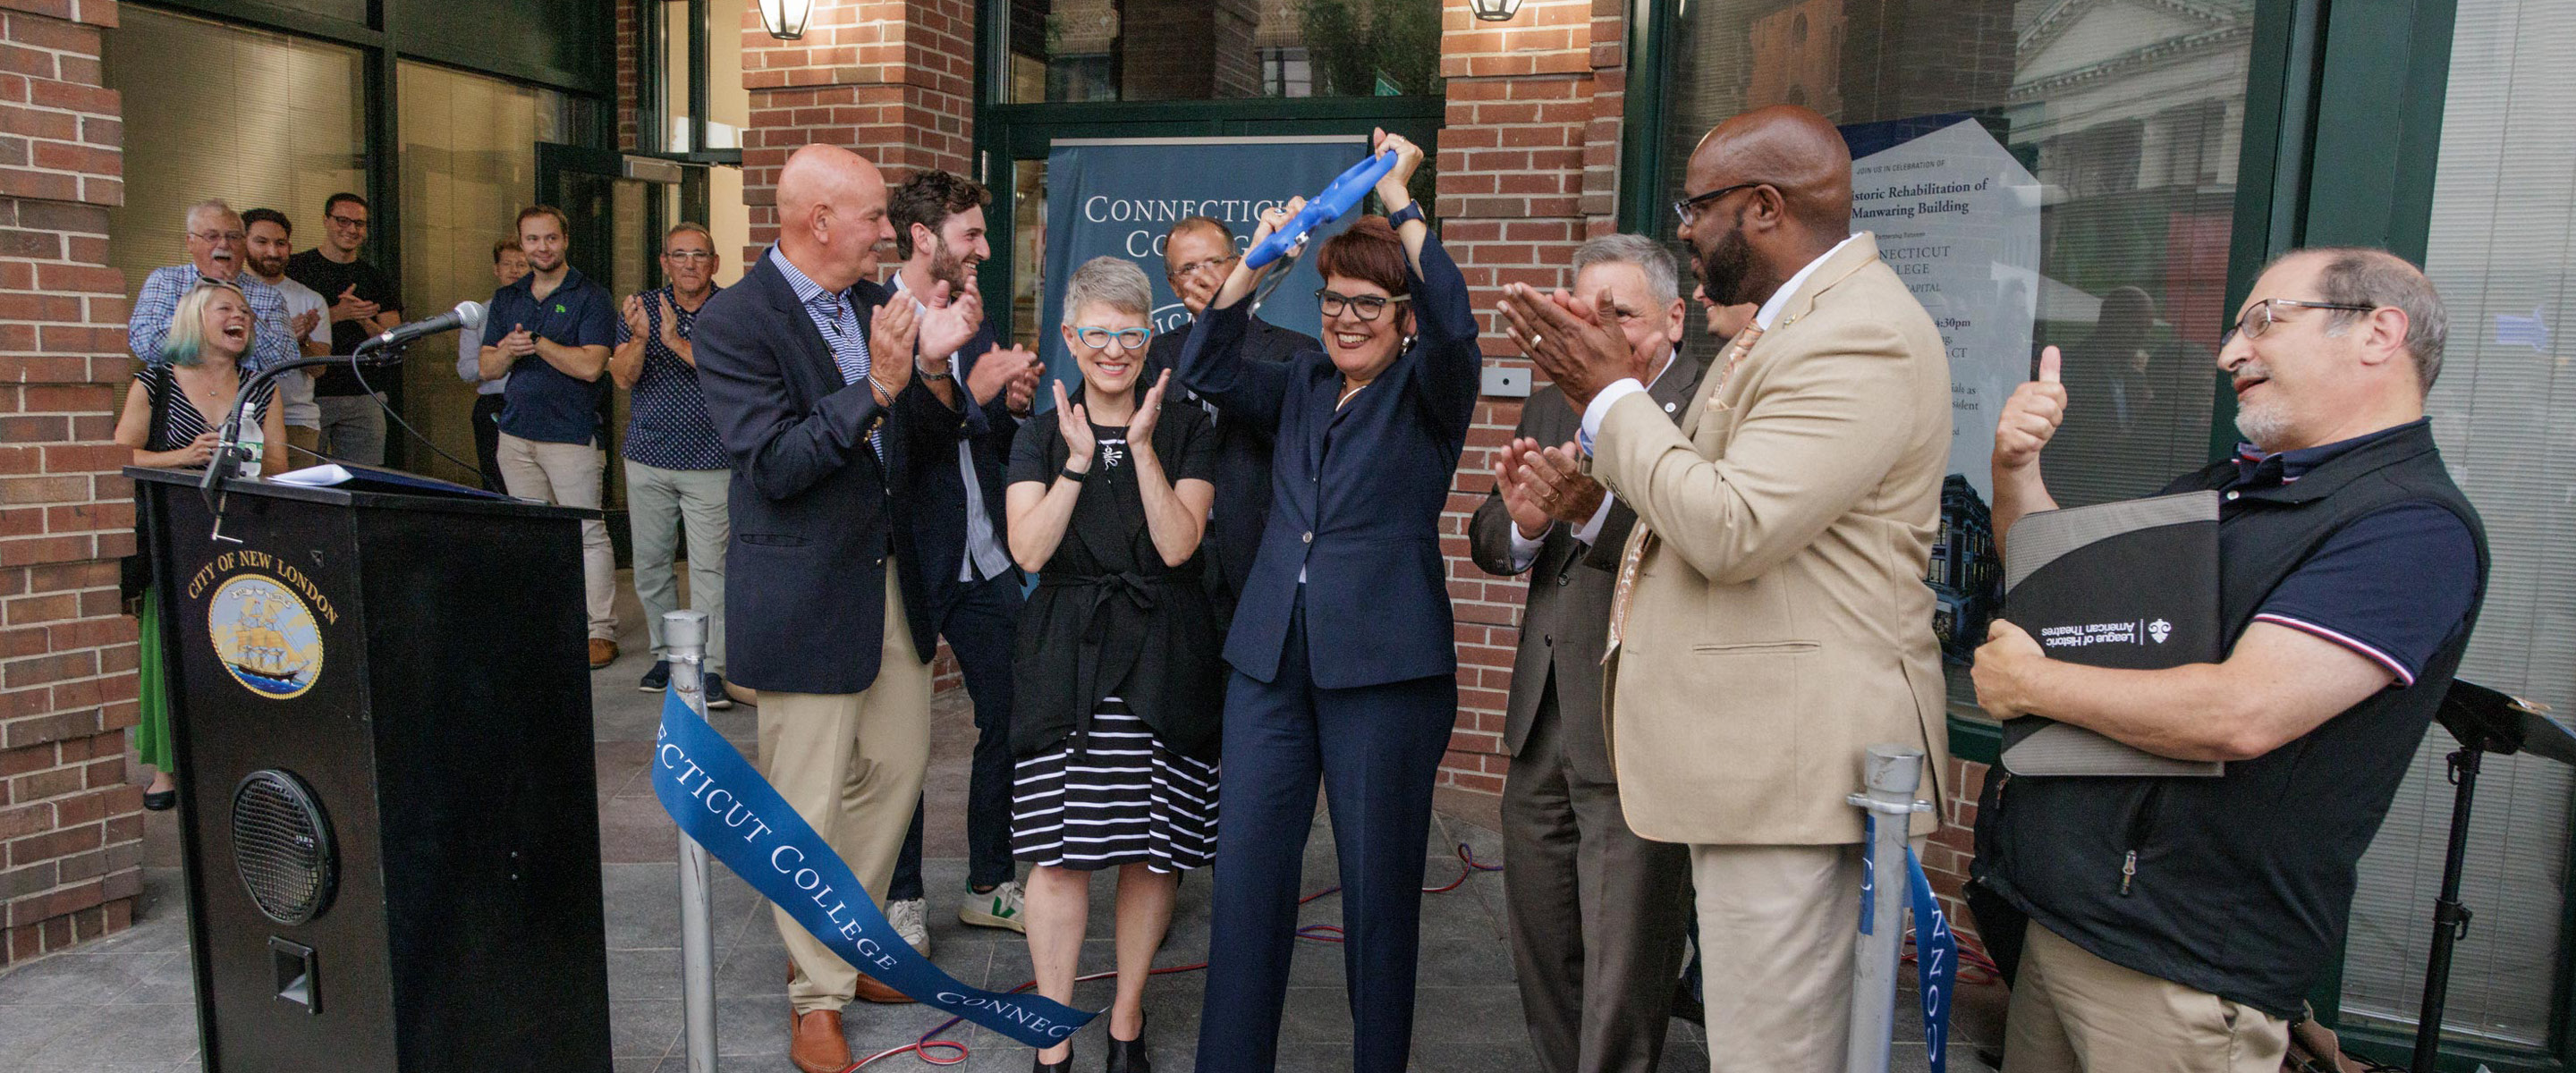 President Katherine Bergeron snips a ceremonial ribbon to open the newly transformed historic Manwaring Building.